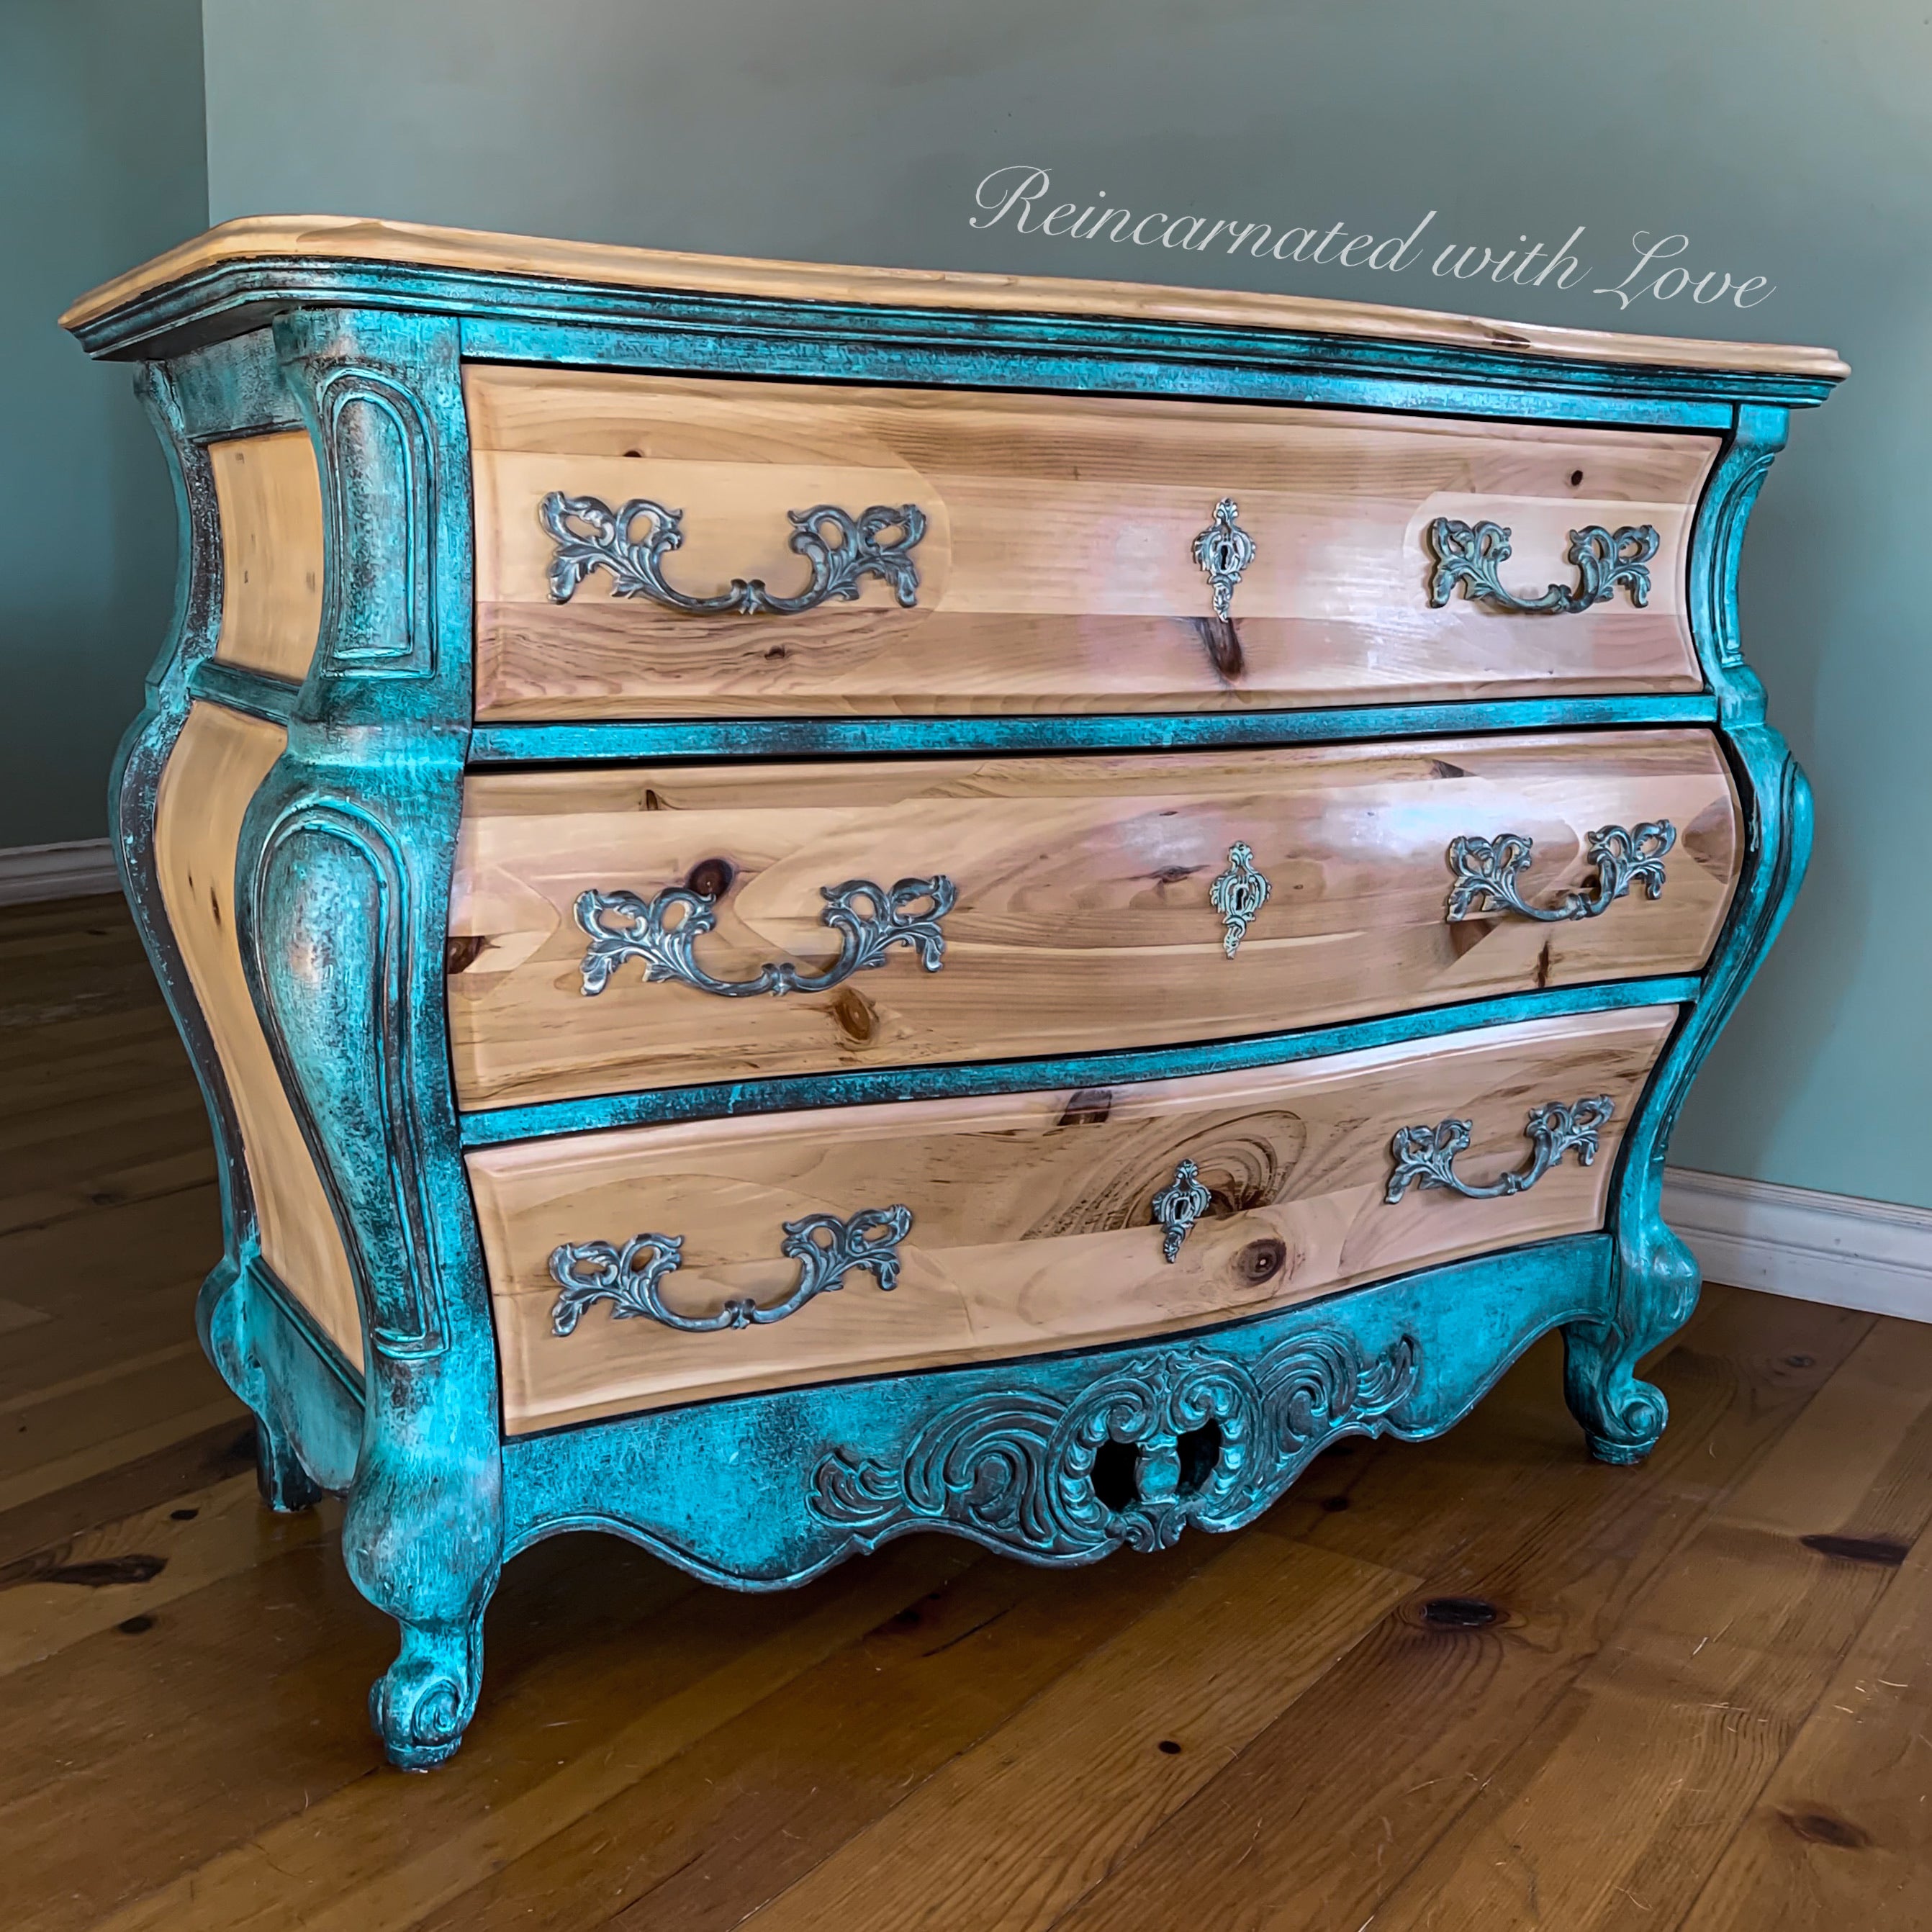 A curvy, boho style dresser done in blue & green patina hues over stained solid pine.